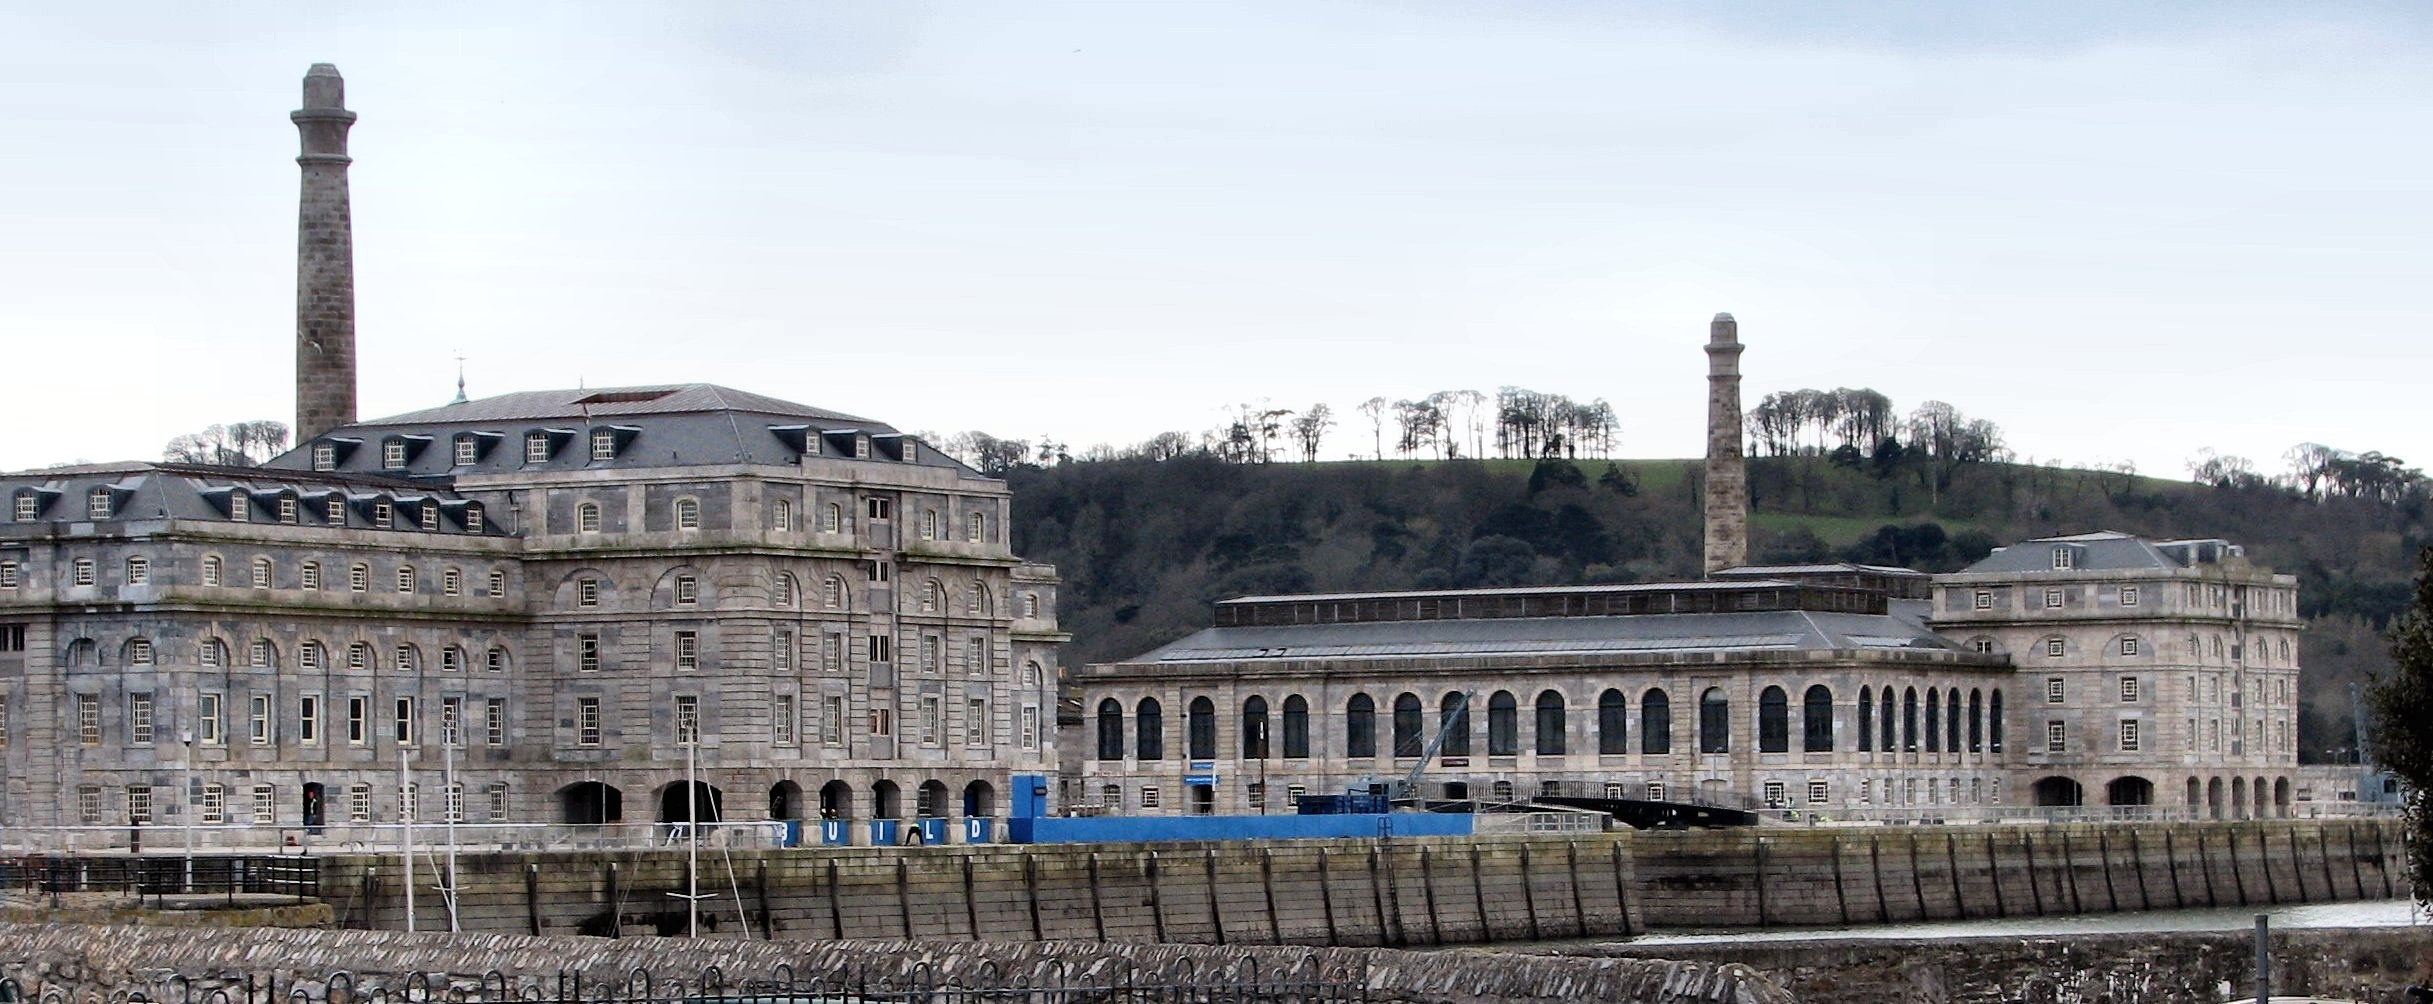 Royal William Victualling Yard, Plymouth